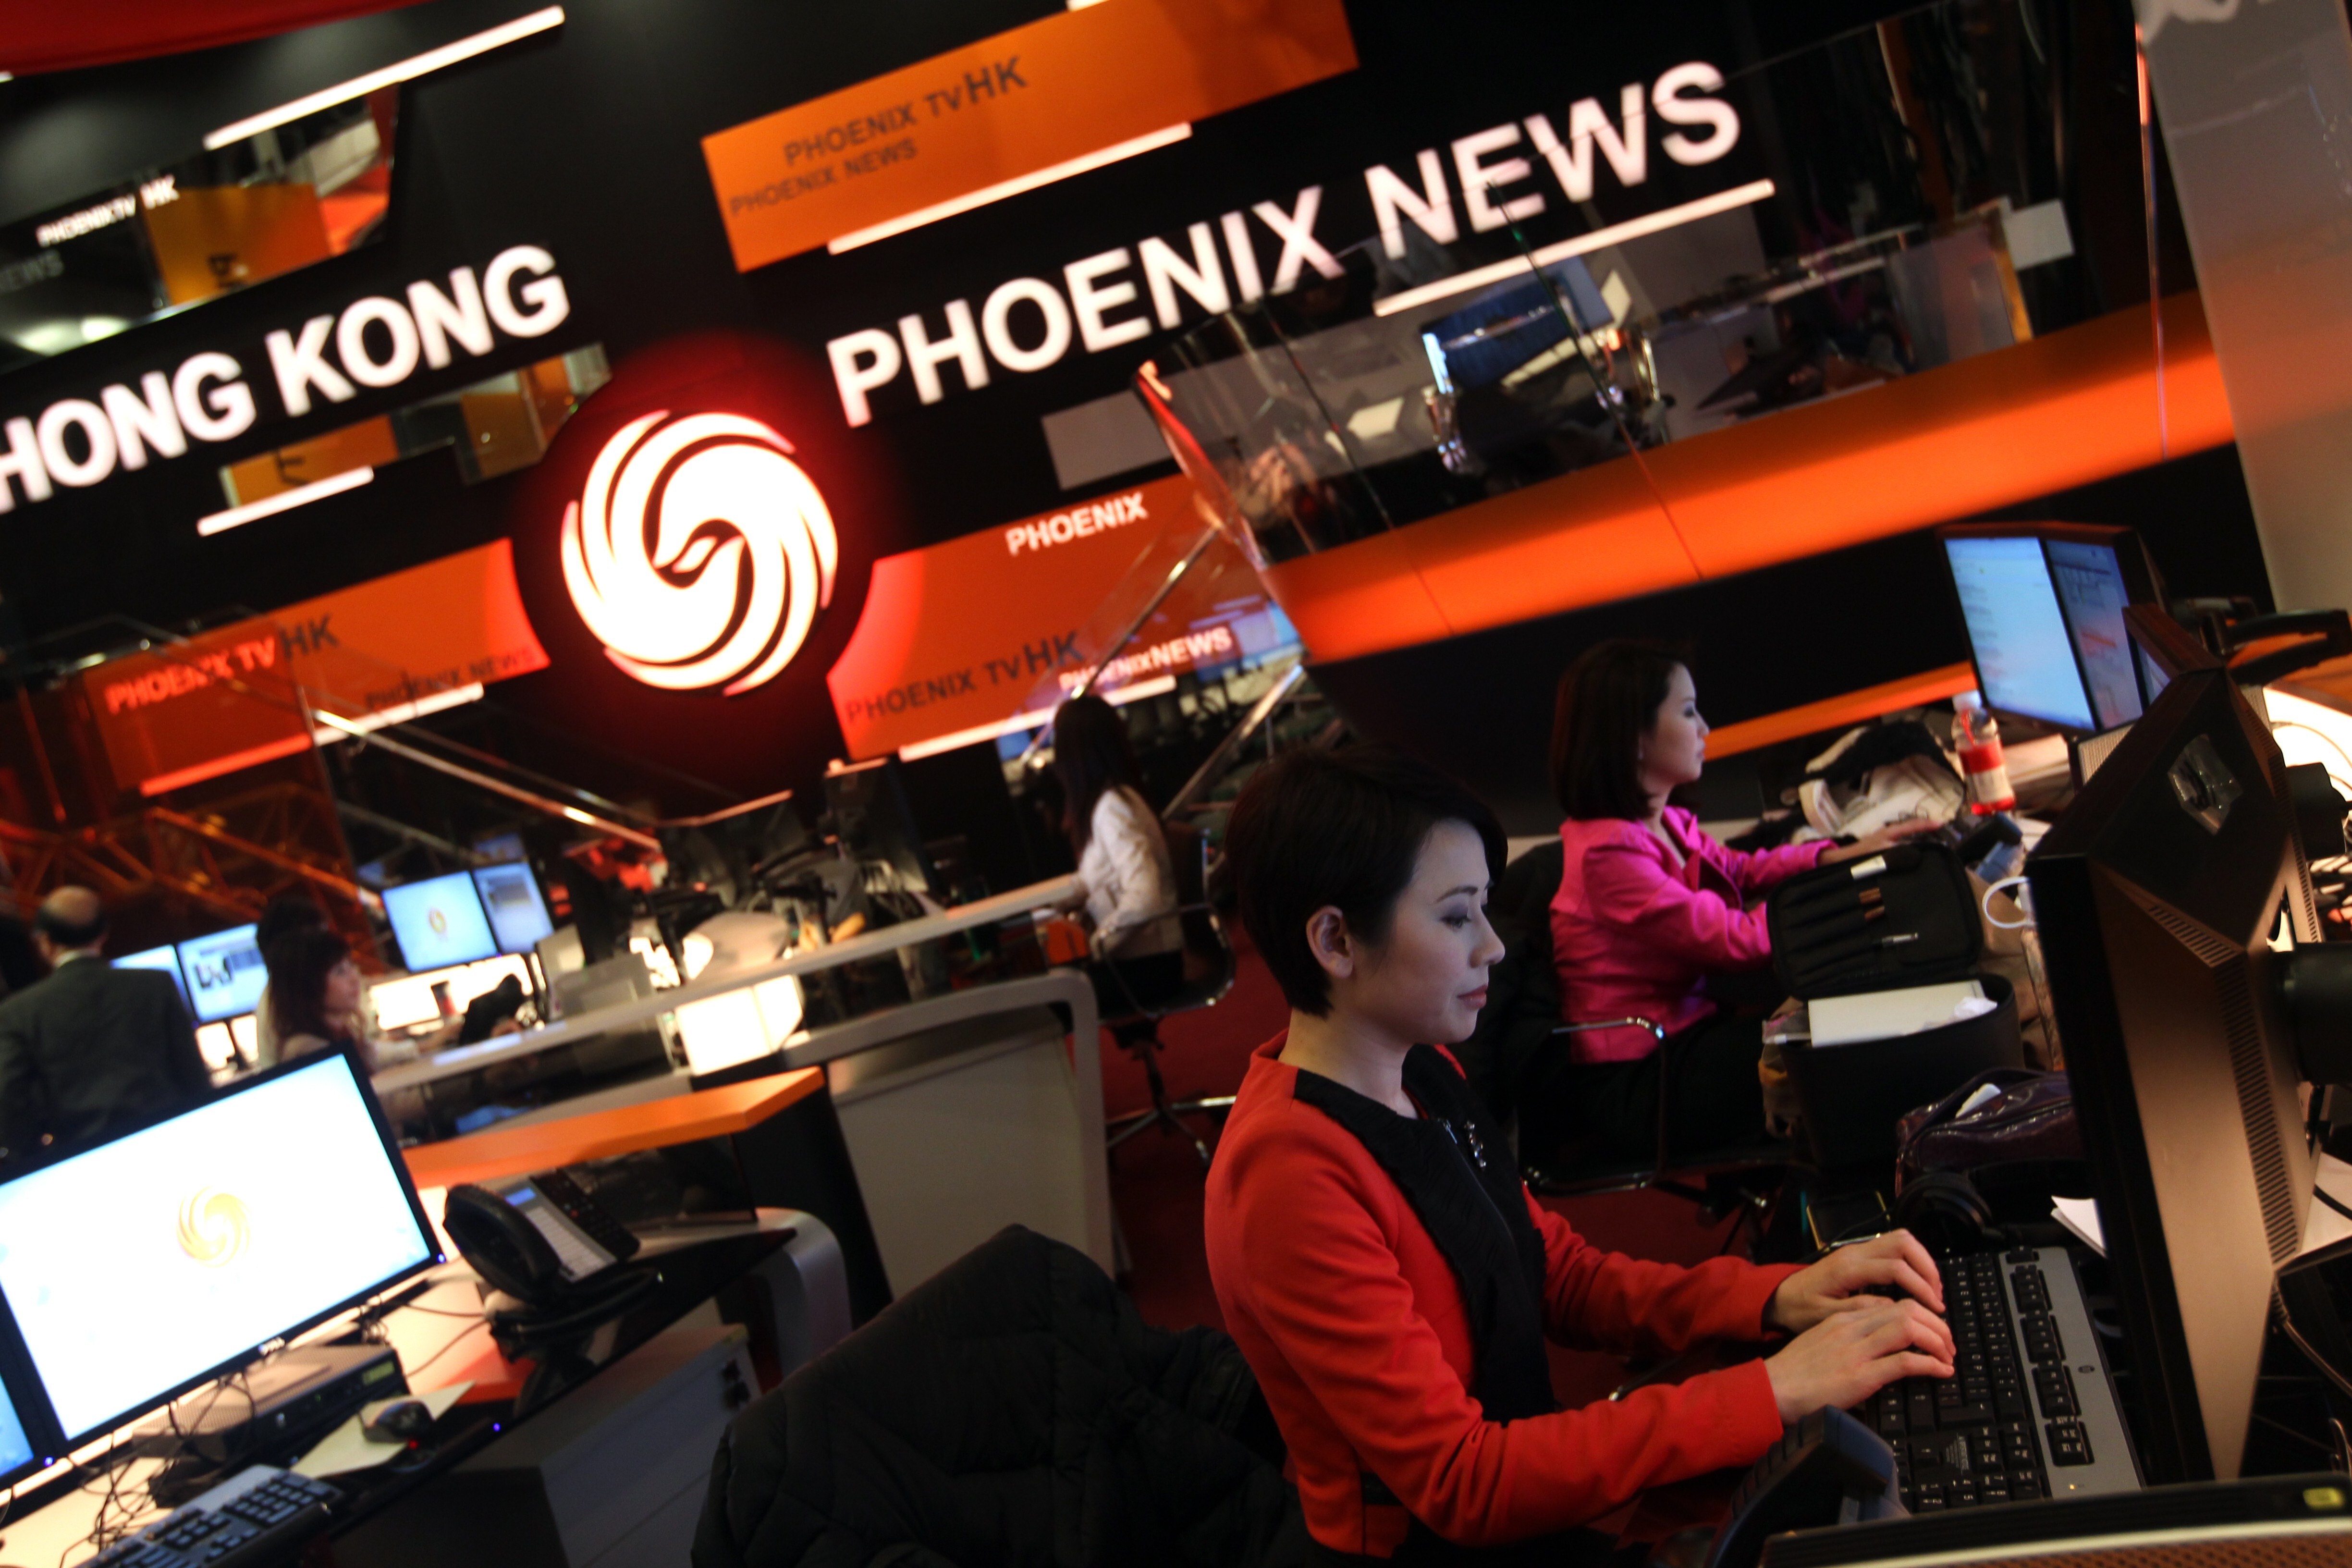 The newsroom of Phoenix Television Corporation in Tai Po Industrial Estate on March 28, 2011. Photo: Handout